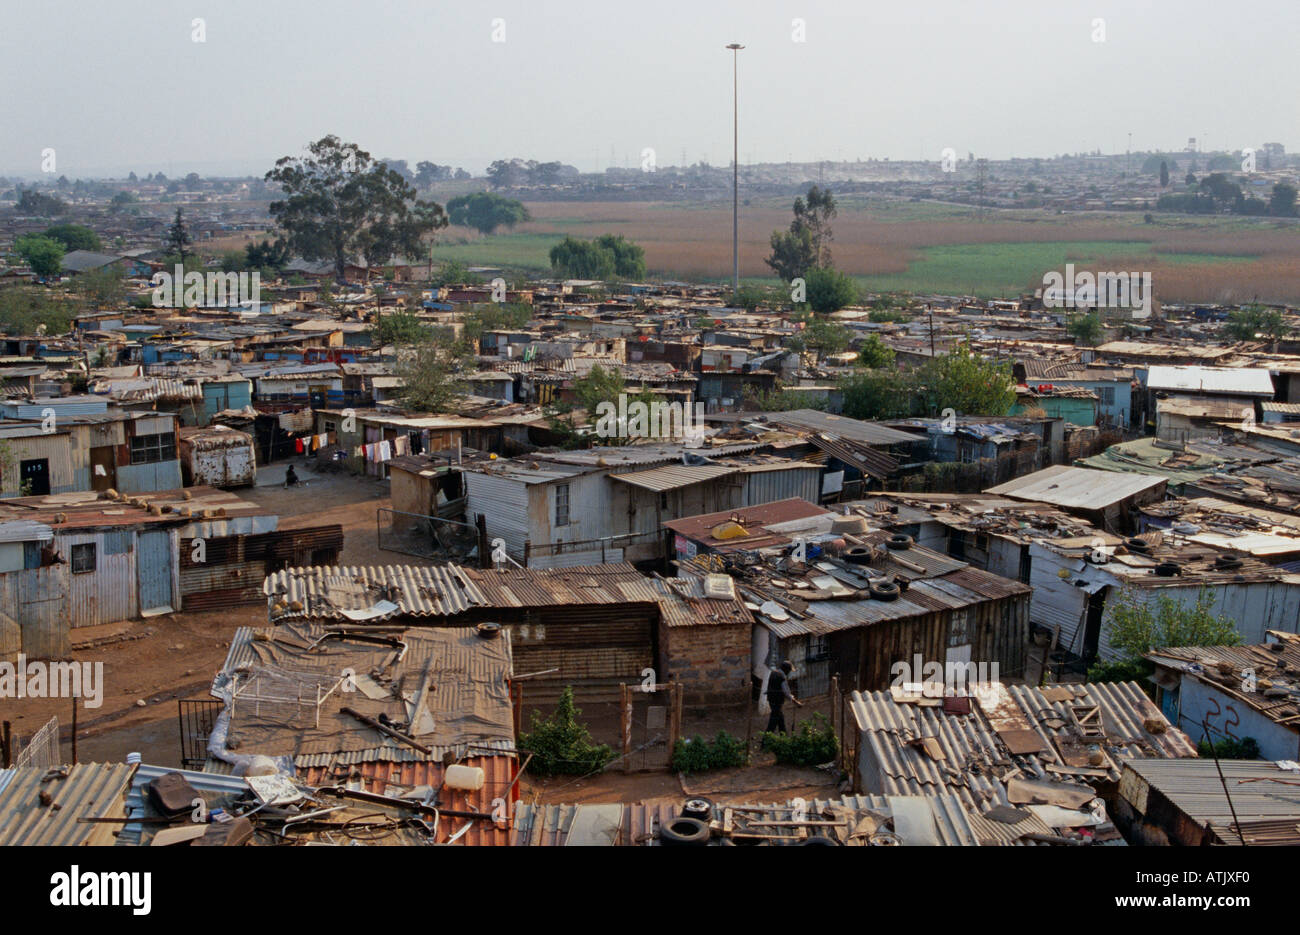 Township with corrugated metal rooftops. Durban, South Africa. Stock Photo